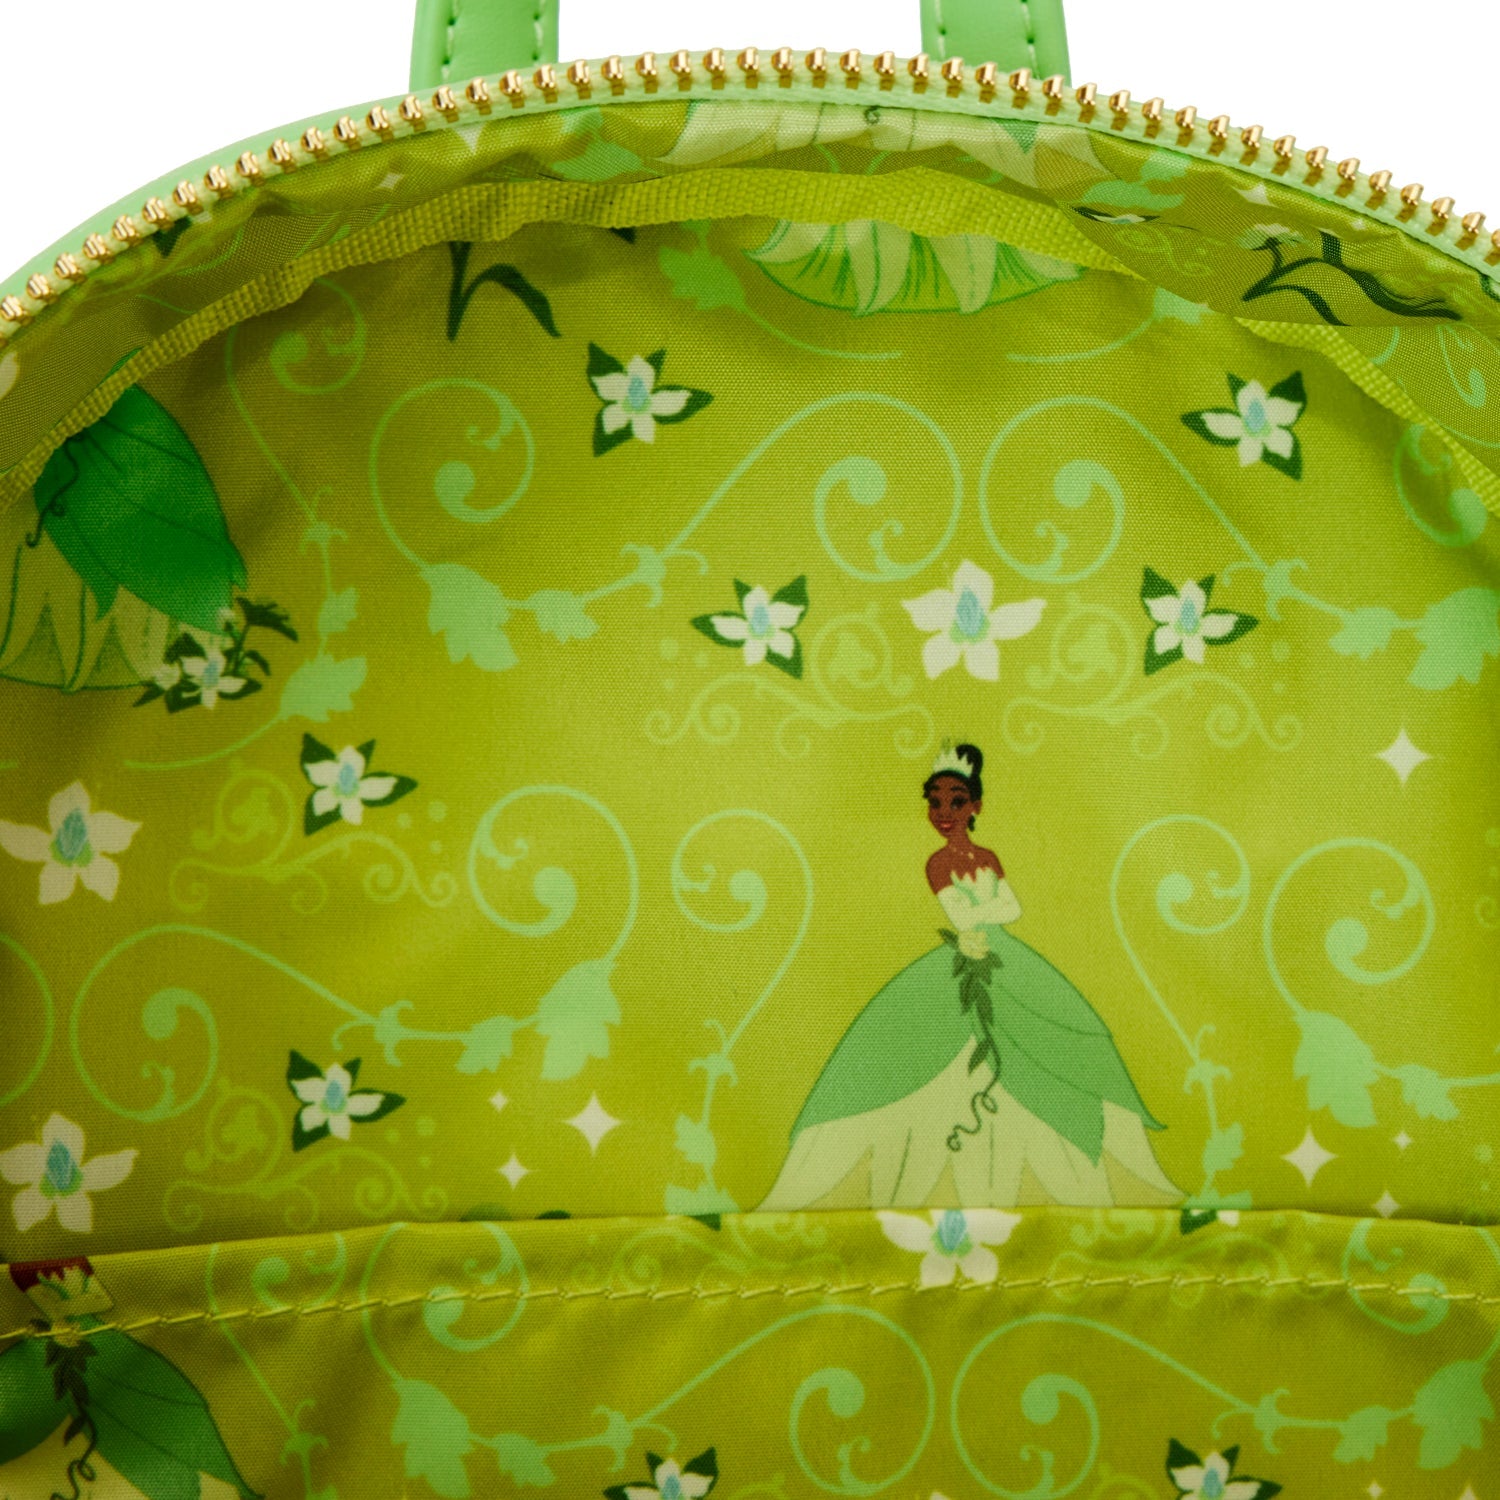 Loungefly x Disney Princess and The Frog Tiana Lenticular Mini Backpack - GeekCore